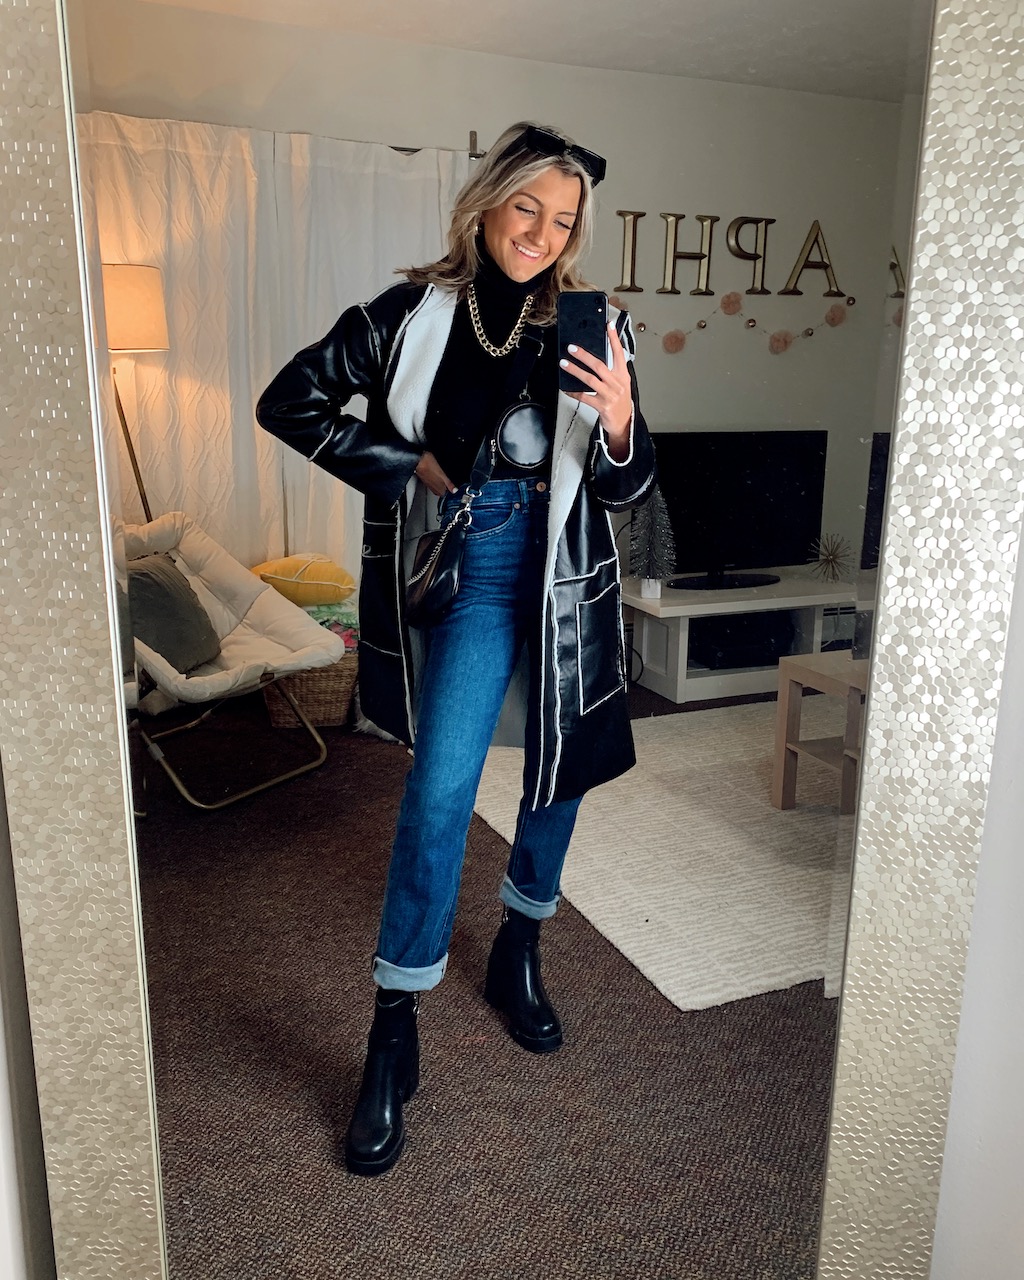 weekly wrap up #49 2020 (week in my life + outfits of the week)